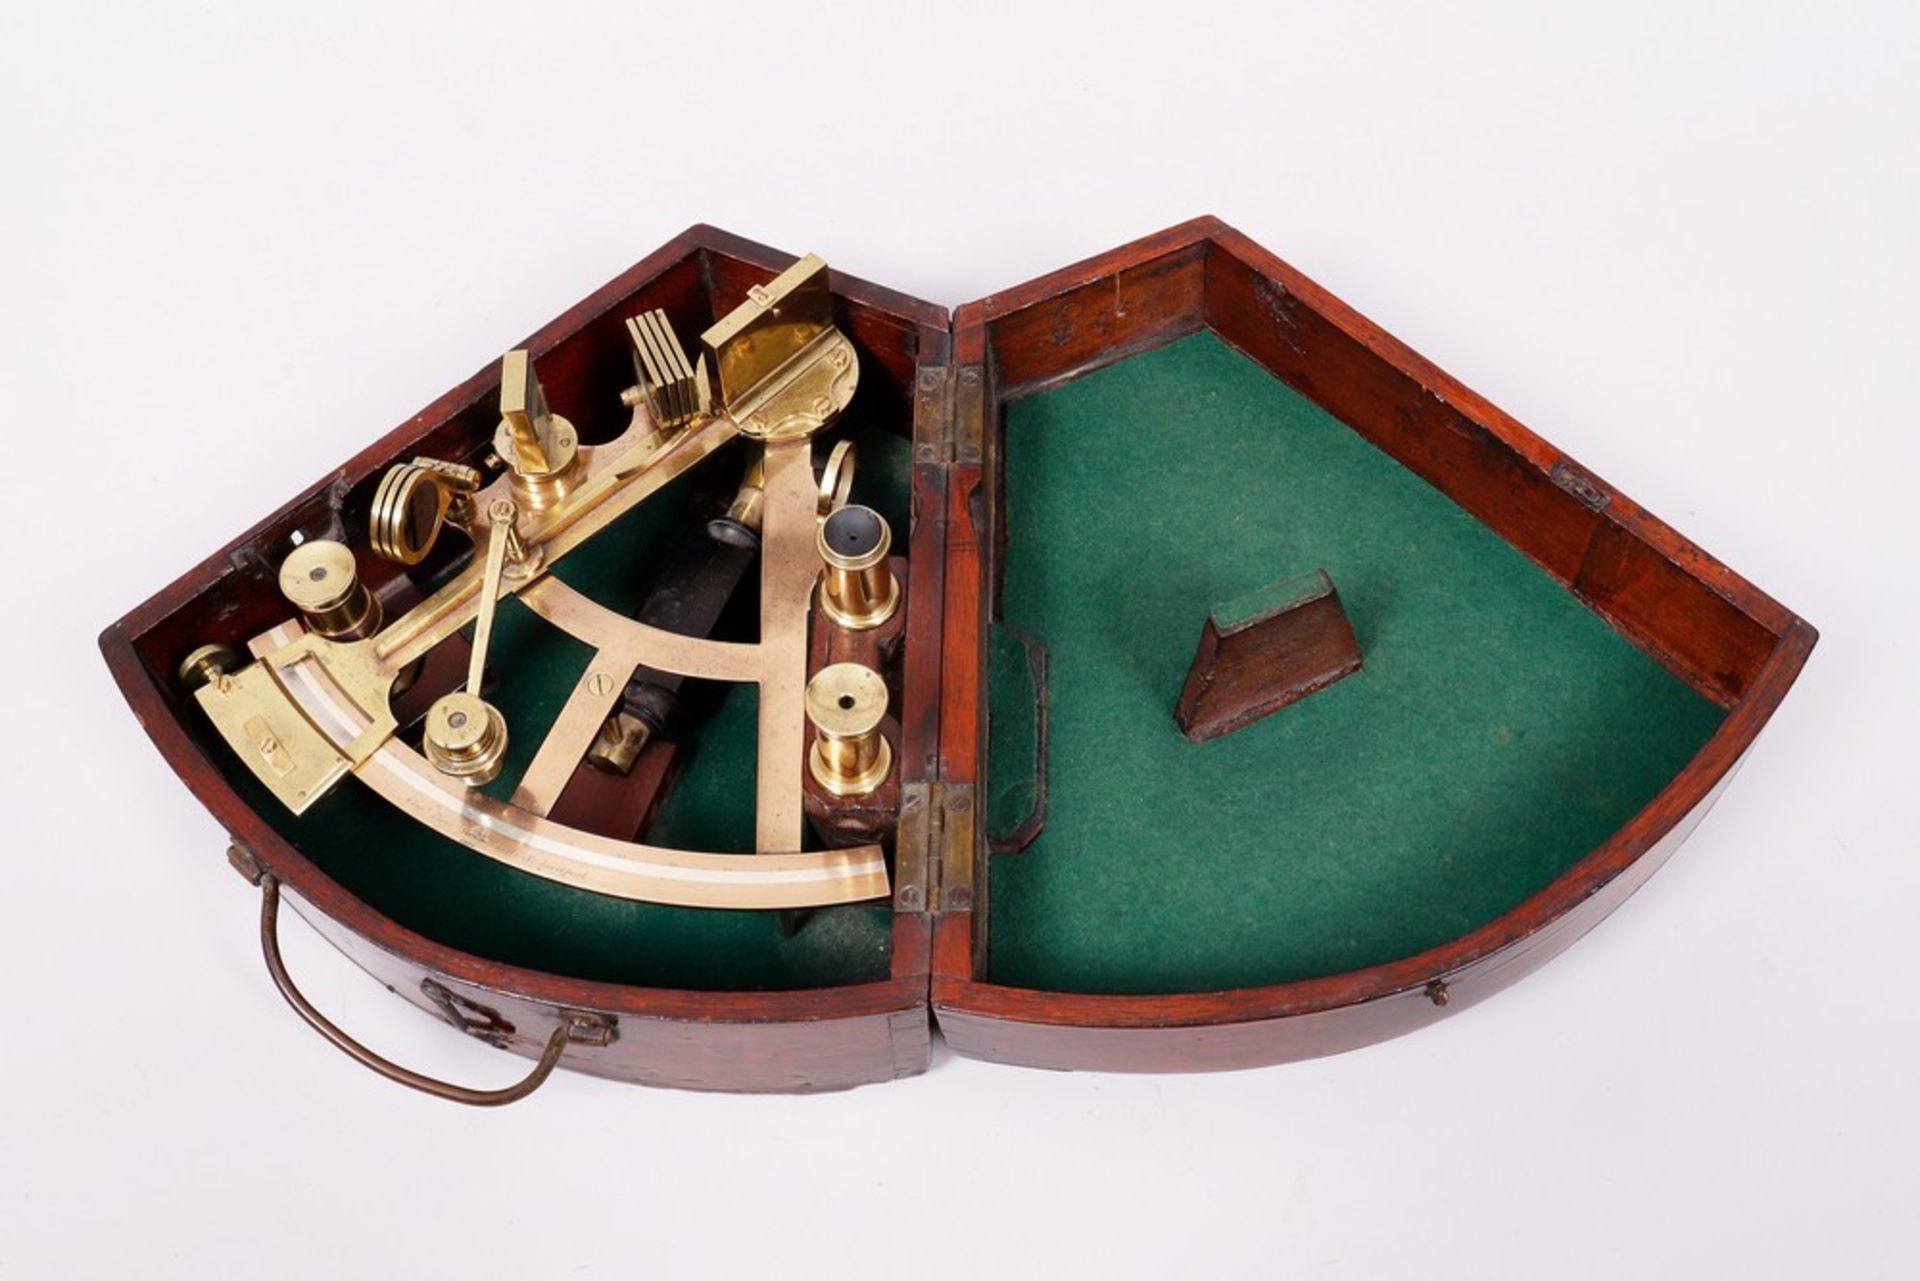 Sextant in transport box, Charles Piers, Liverpool, probably mid-19th C. - Image 4 of 4